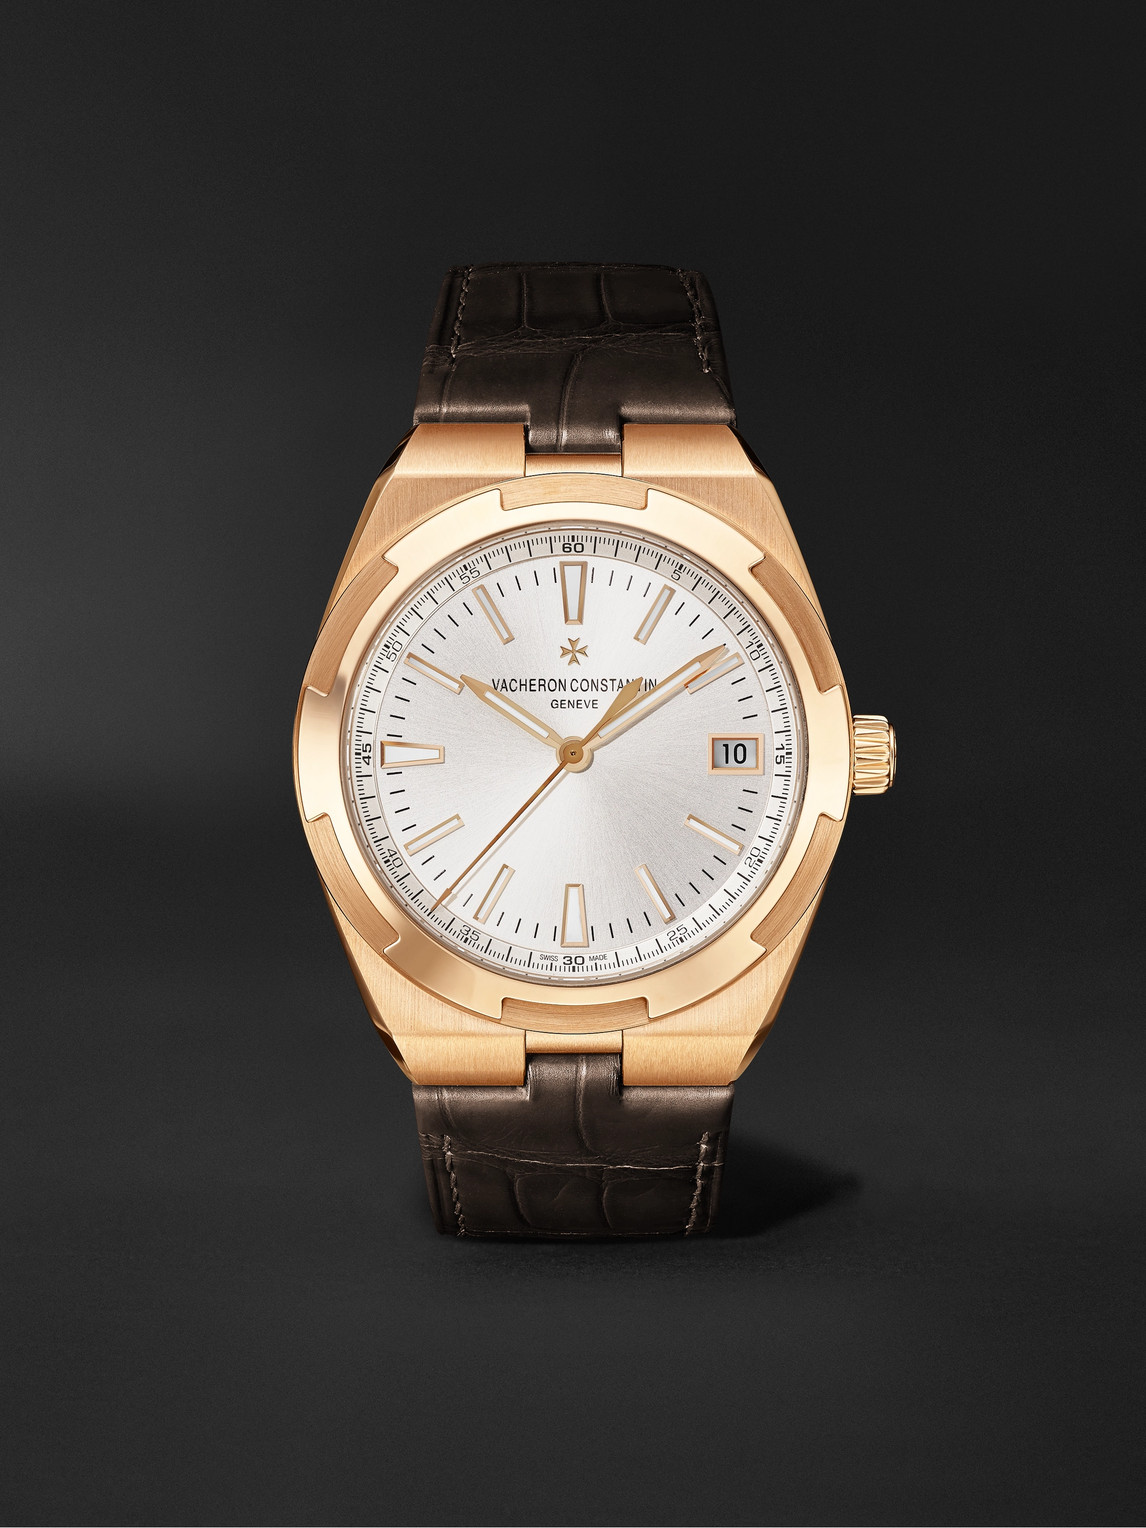 Vacheron Constantin Overseas Automatic 41mm 18-karat Pink Gold And Leather Watch, Ref. No. 4500v/000r-b127